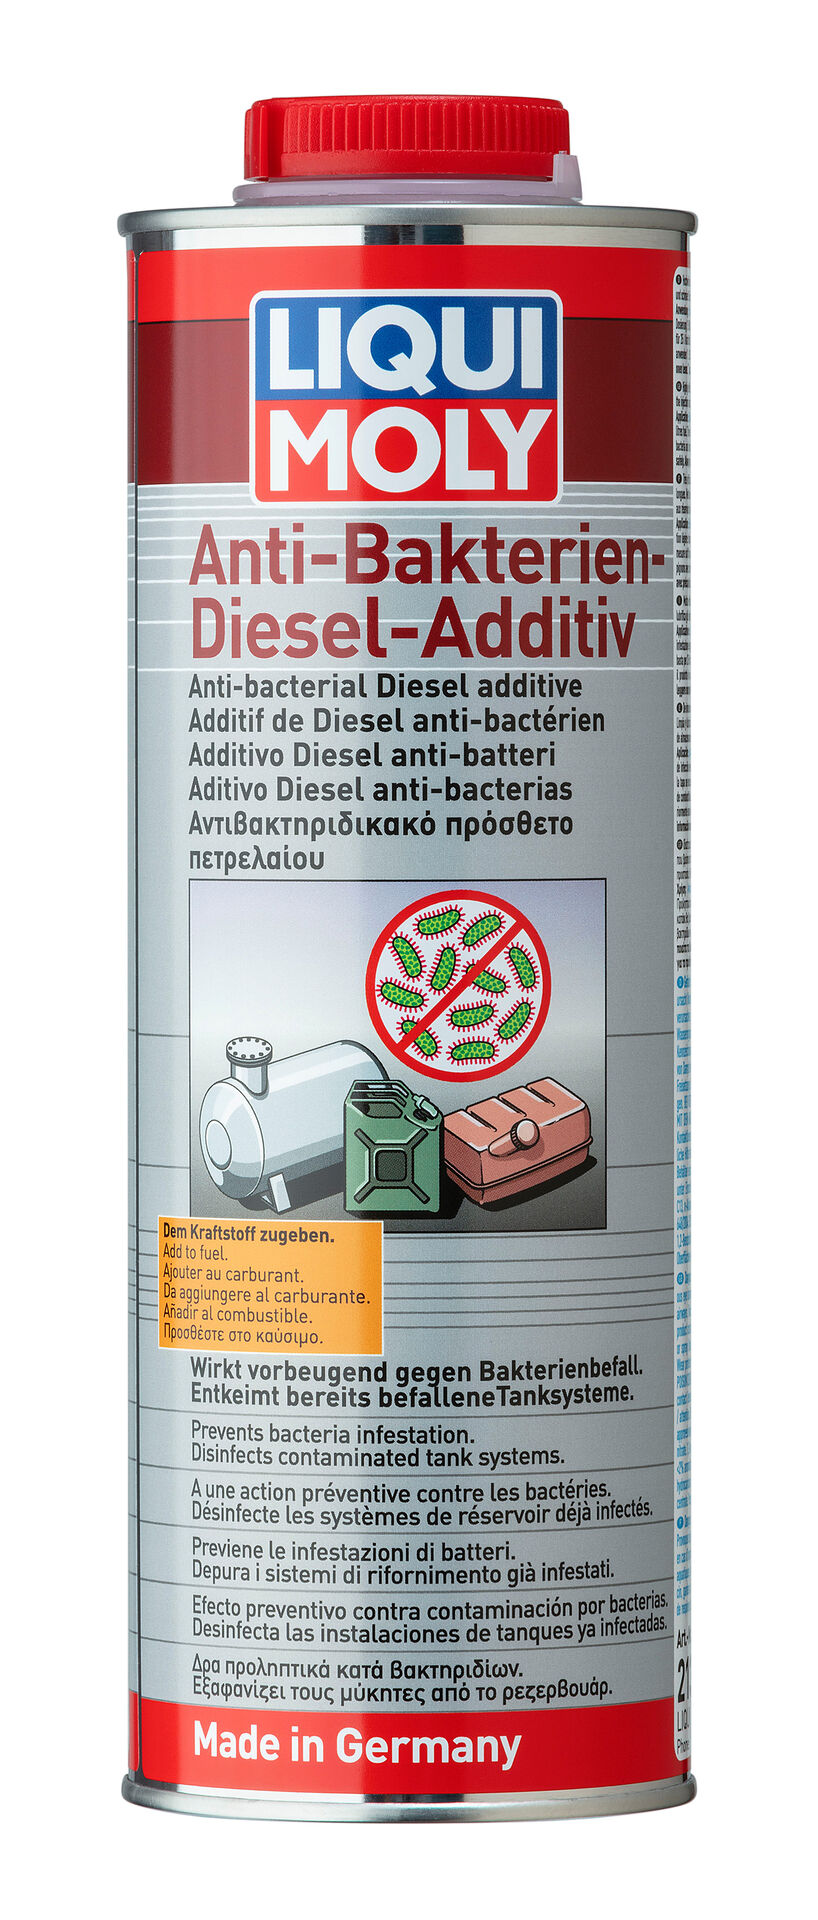 Diesel Particulate Filter Cleaning Purge (500 ml) - Liqui Moly - Prosource